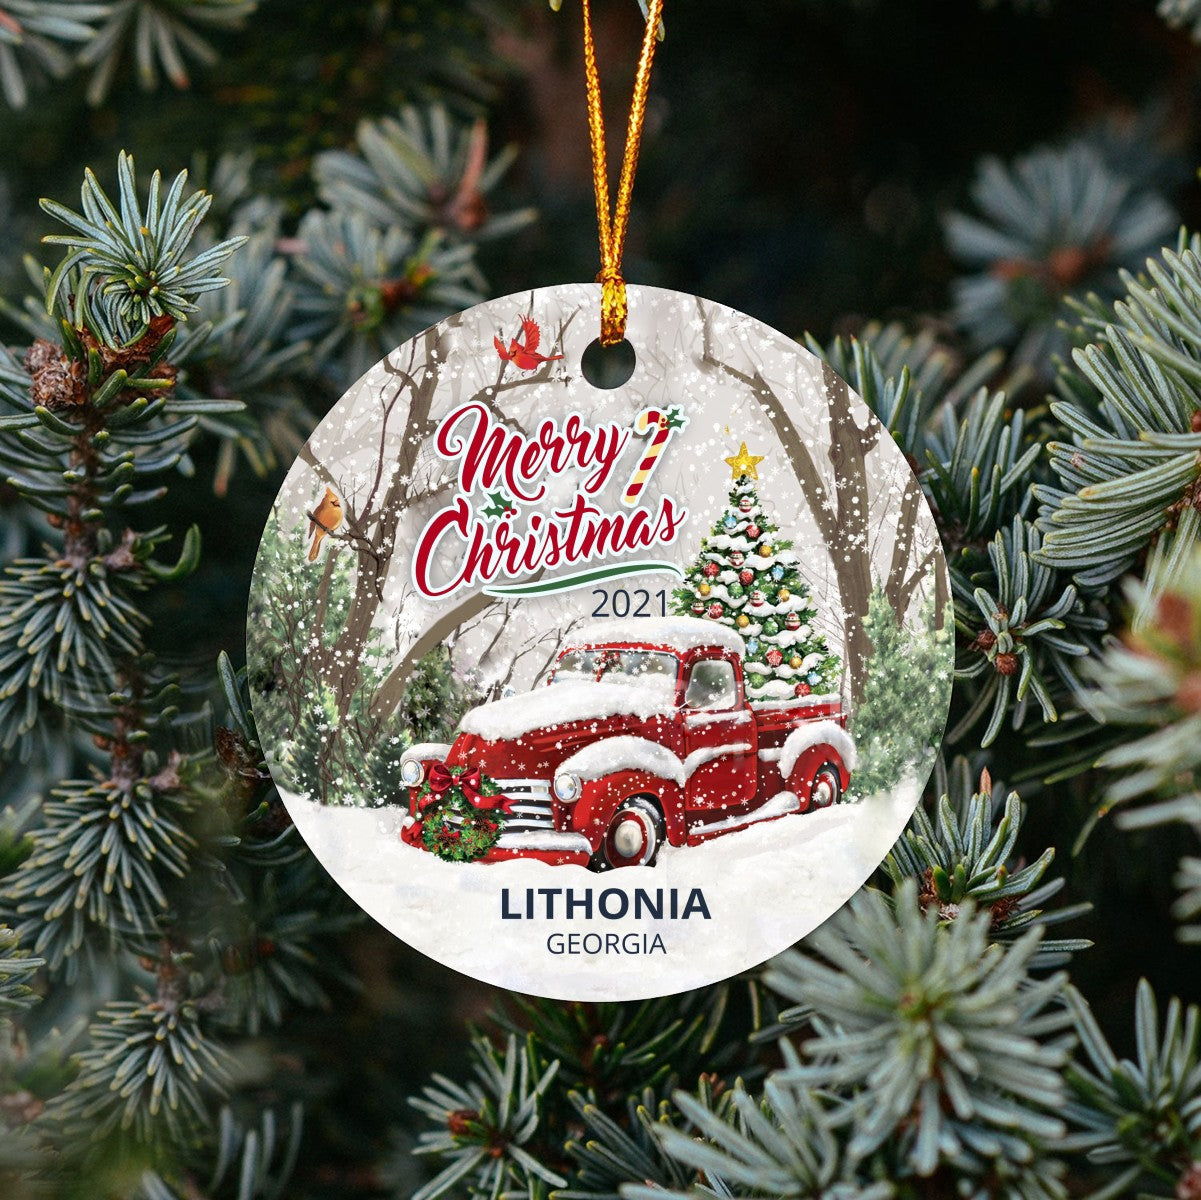 Christmas Tree Ornaments Lithonia - Ornament Customize With Name City And State Lithonia Georgia GA - Red Truck Xmas Ornaments 3'' Plastic Gift For Family, Friend And Housewarming